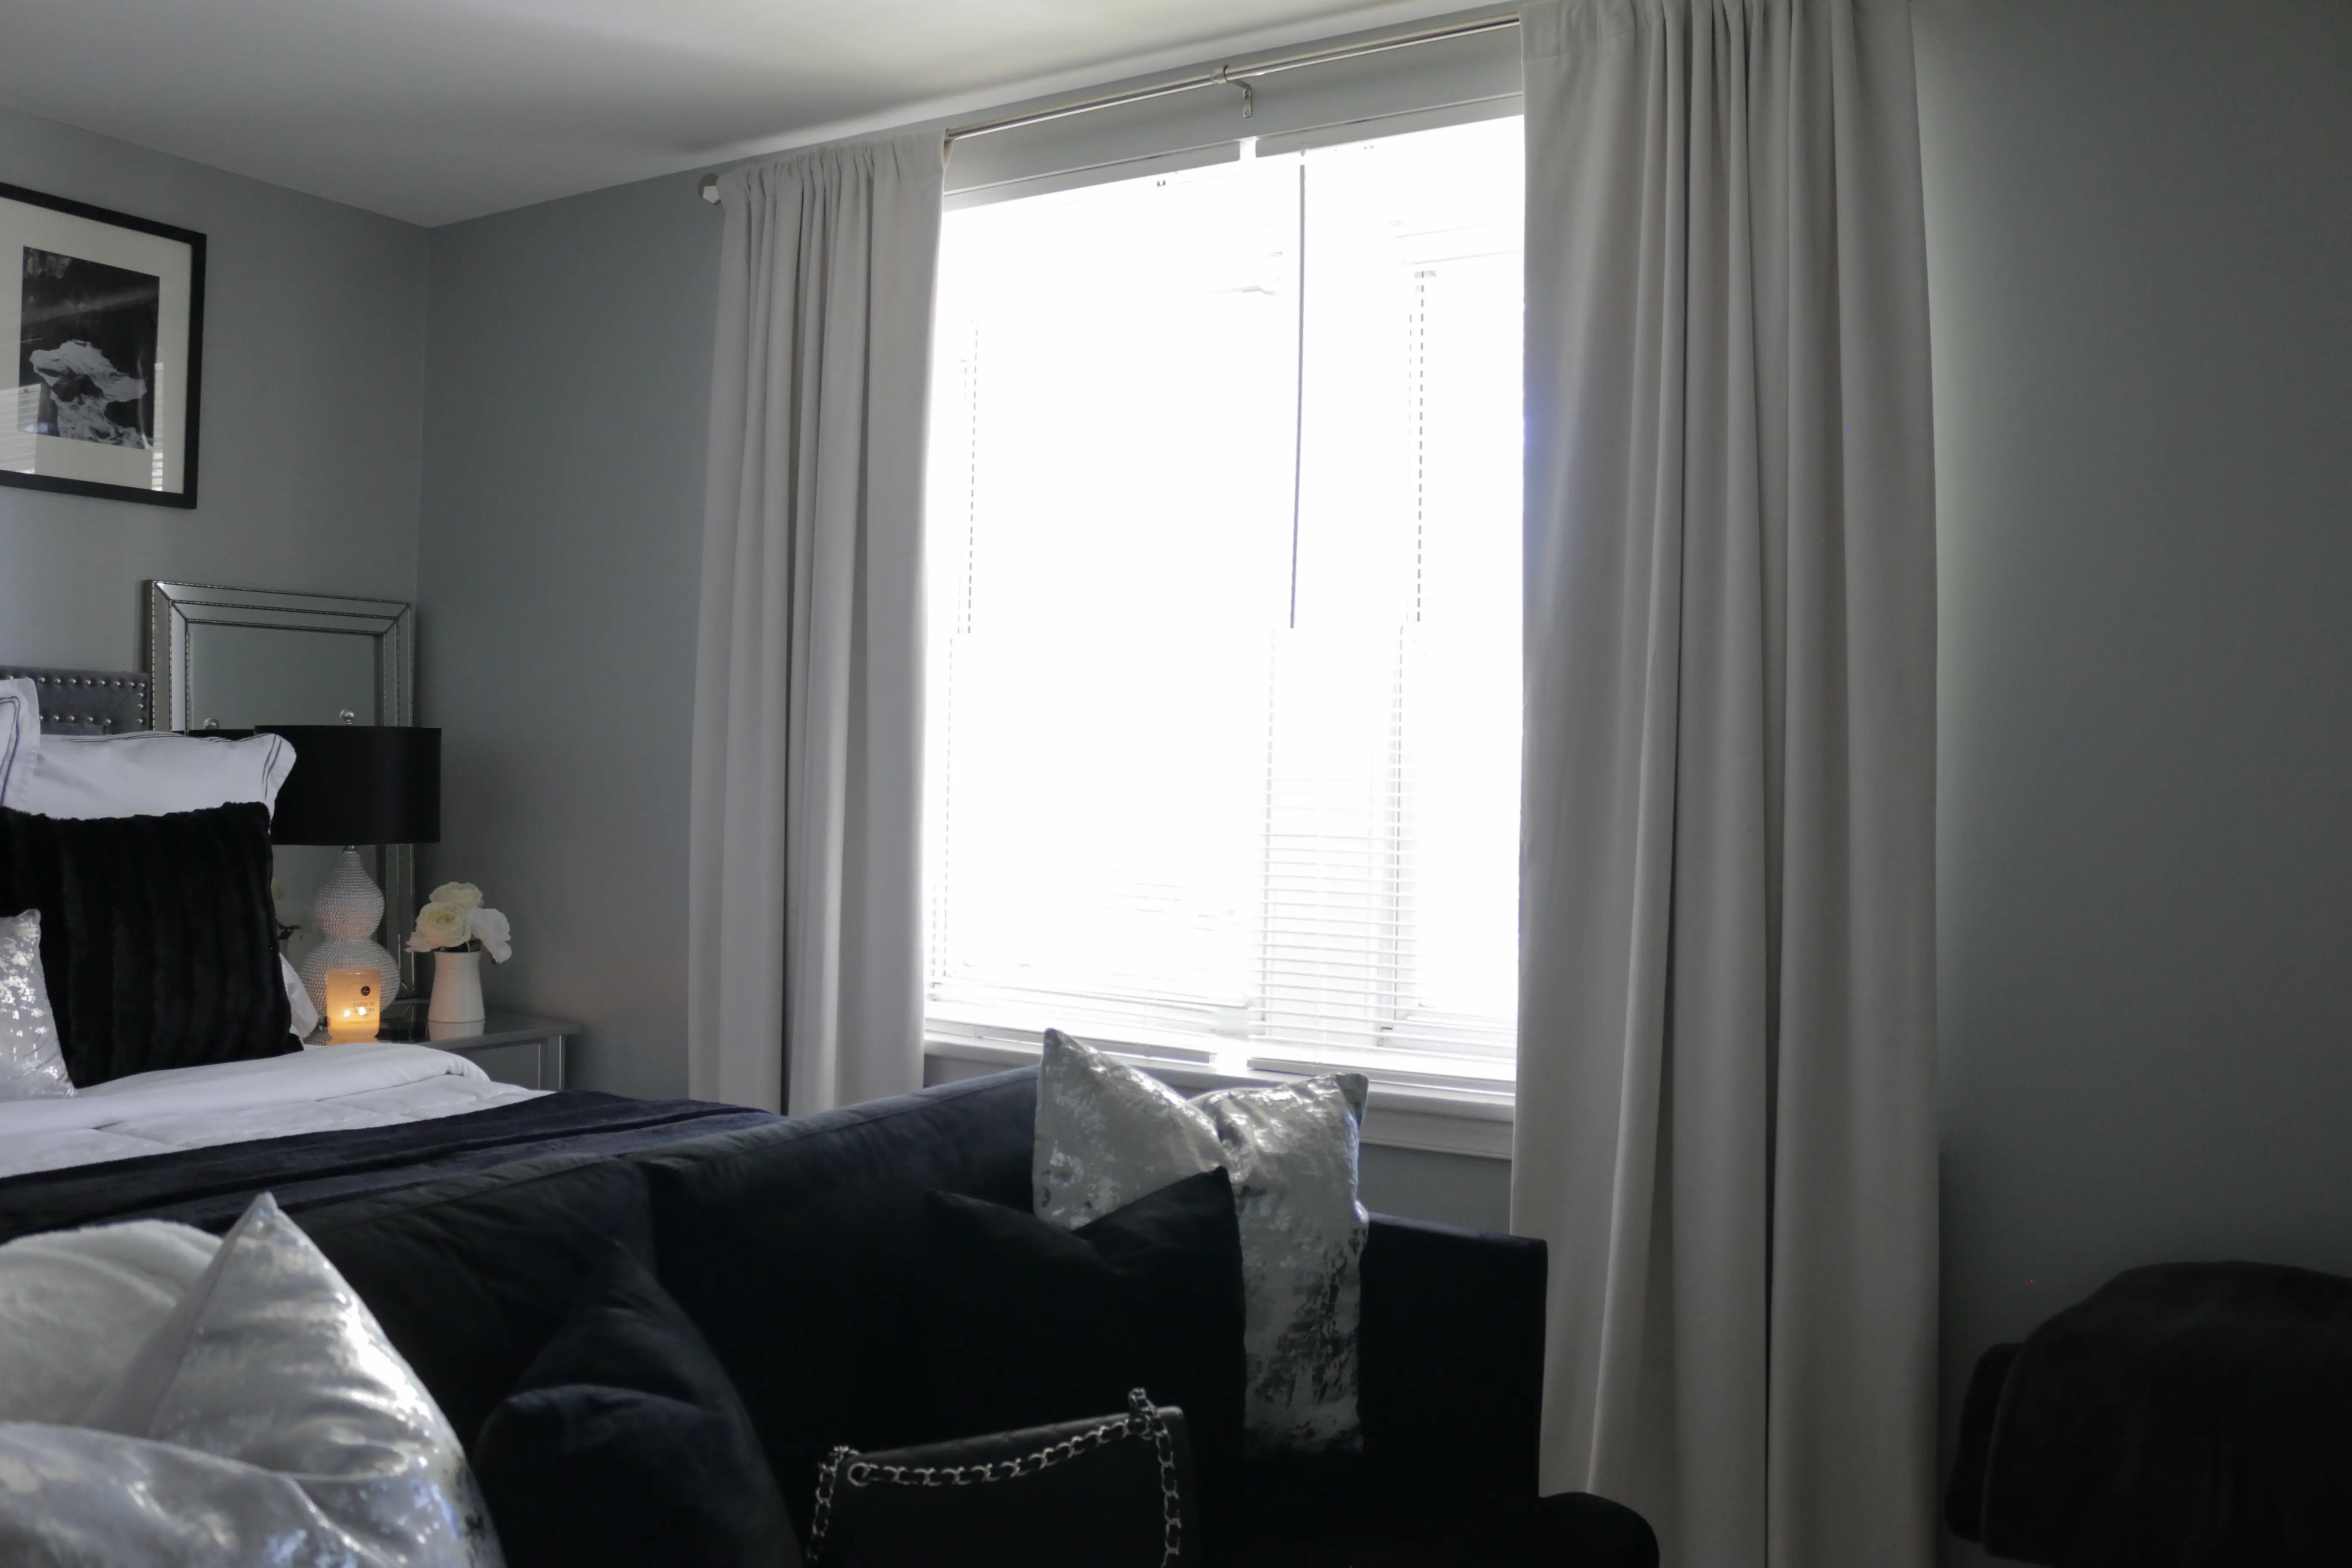 Floor to Ceiling Curtains
Black, Gray and White Glam Master Bedroom 